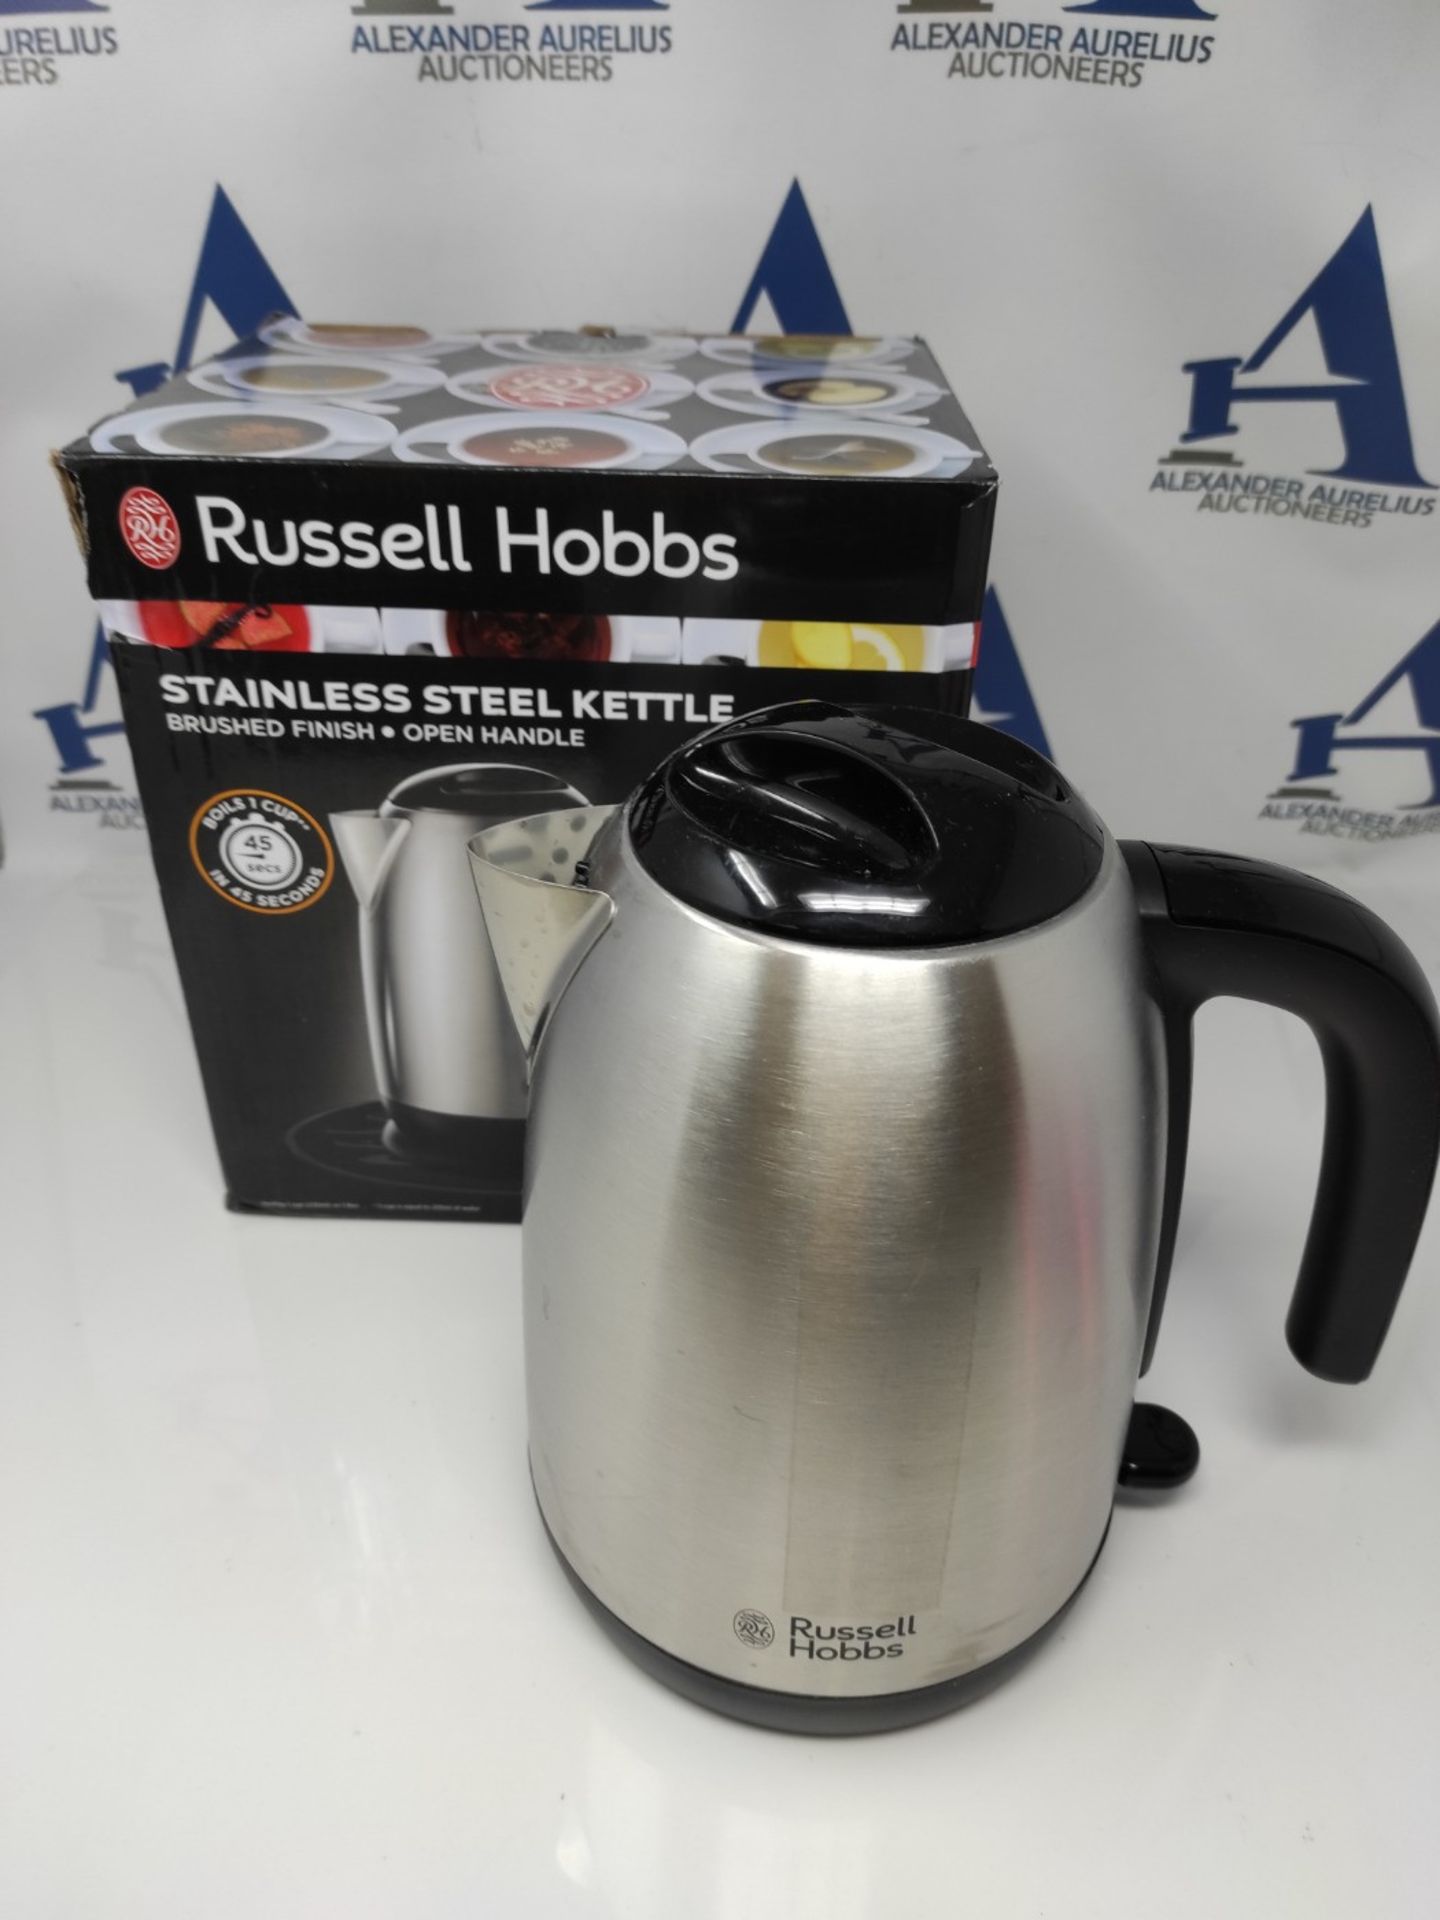 [INCOMPLETE] Russell Hobbs 23910 Adventure Brushed Stainless Steel Electric Kettle, Op - Image 2 of 2